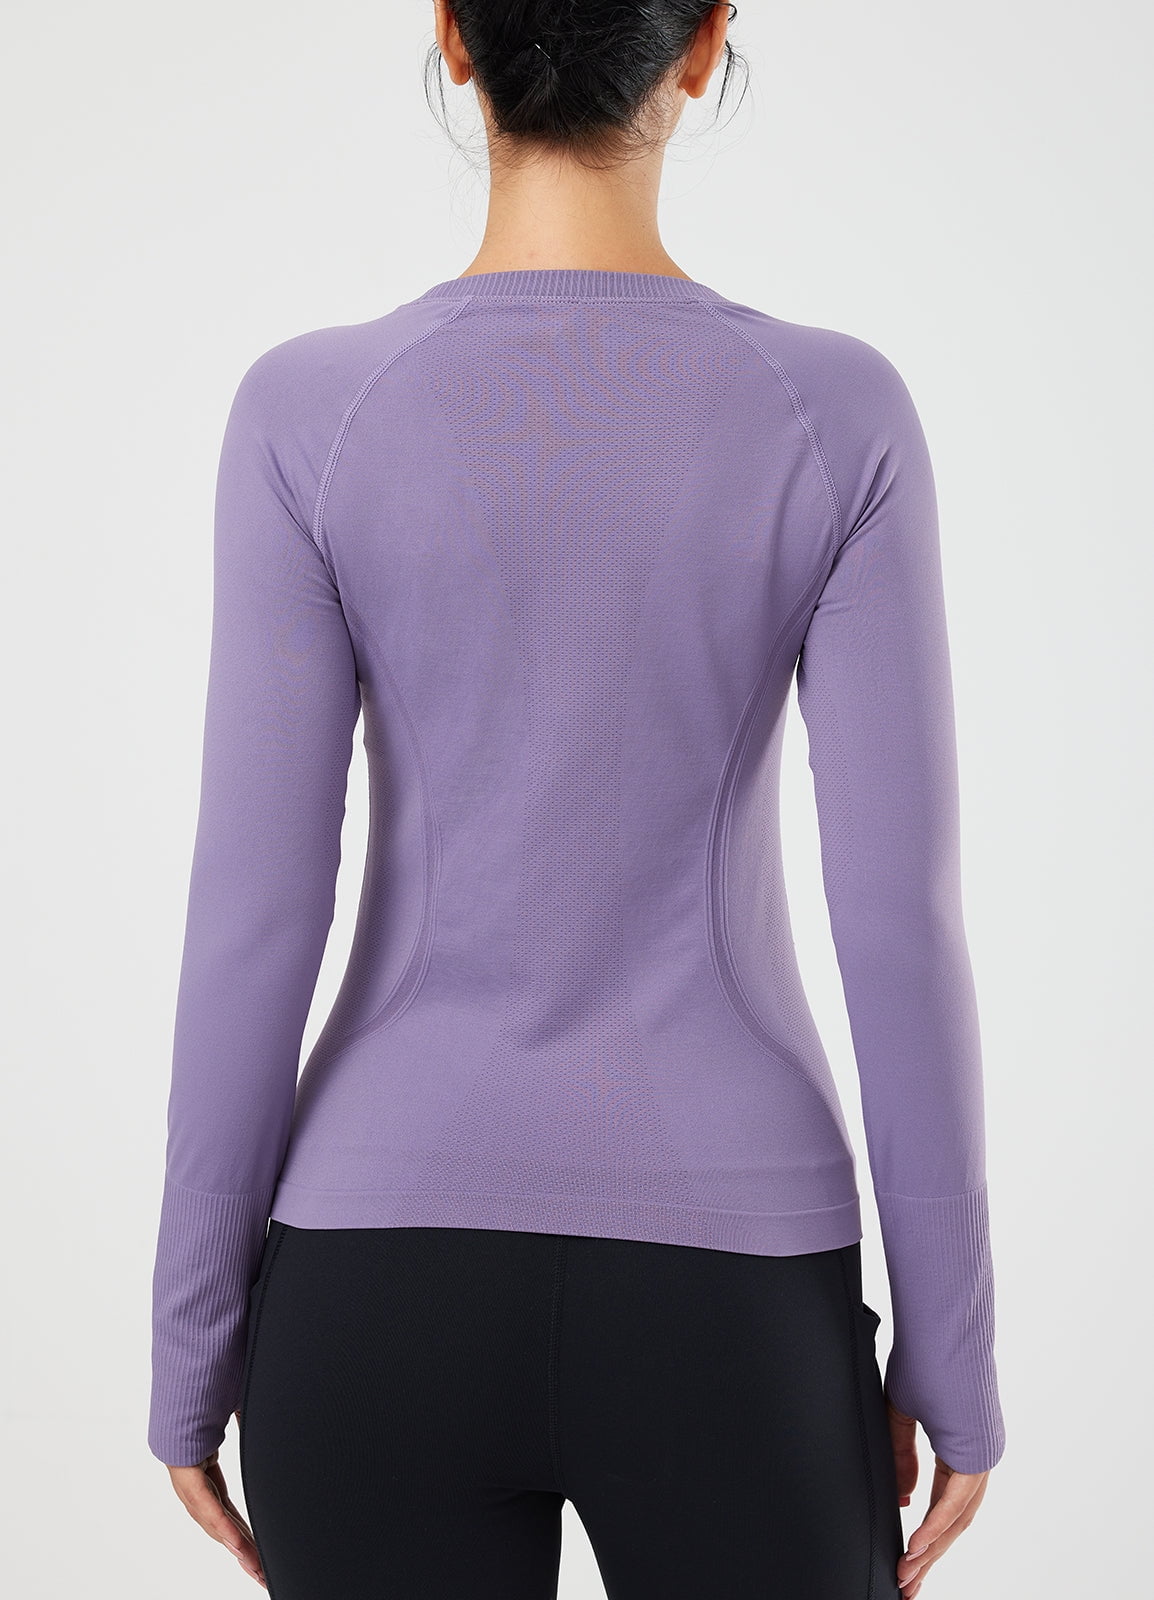 BALEAF Long Sleeve Sweat Shirts For Women Seamless Tight with